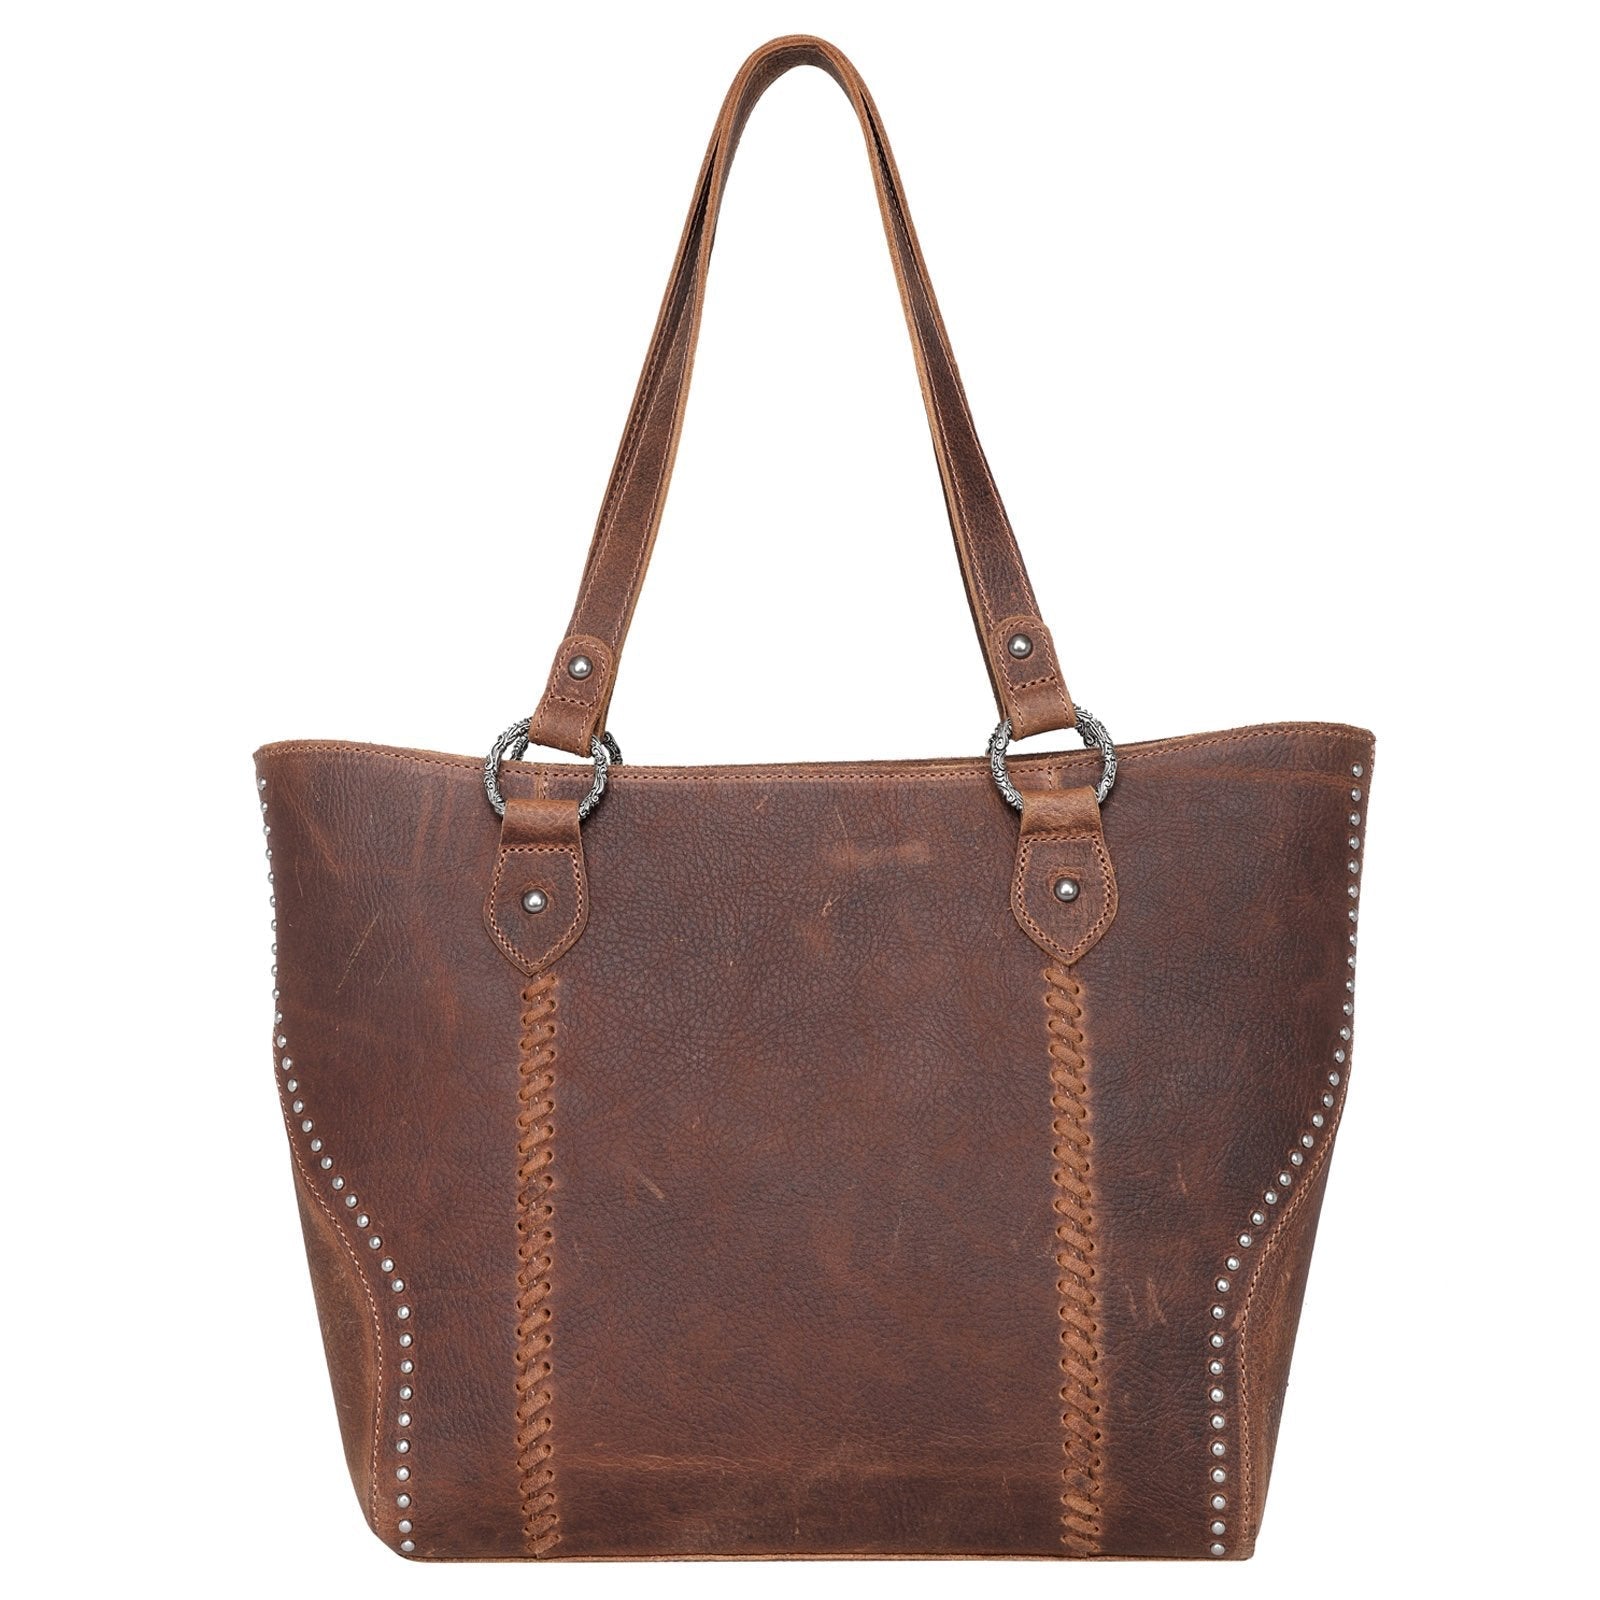 Montana West Genuine Leather Concealed Carry Tote Handbag For Women - Cowgirl Wear